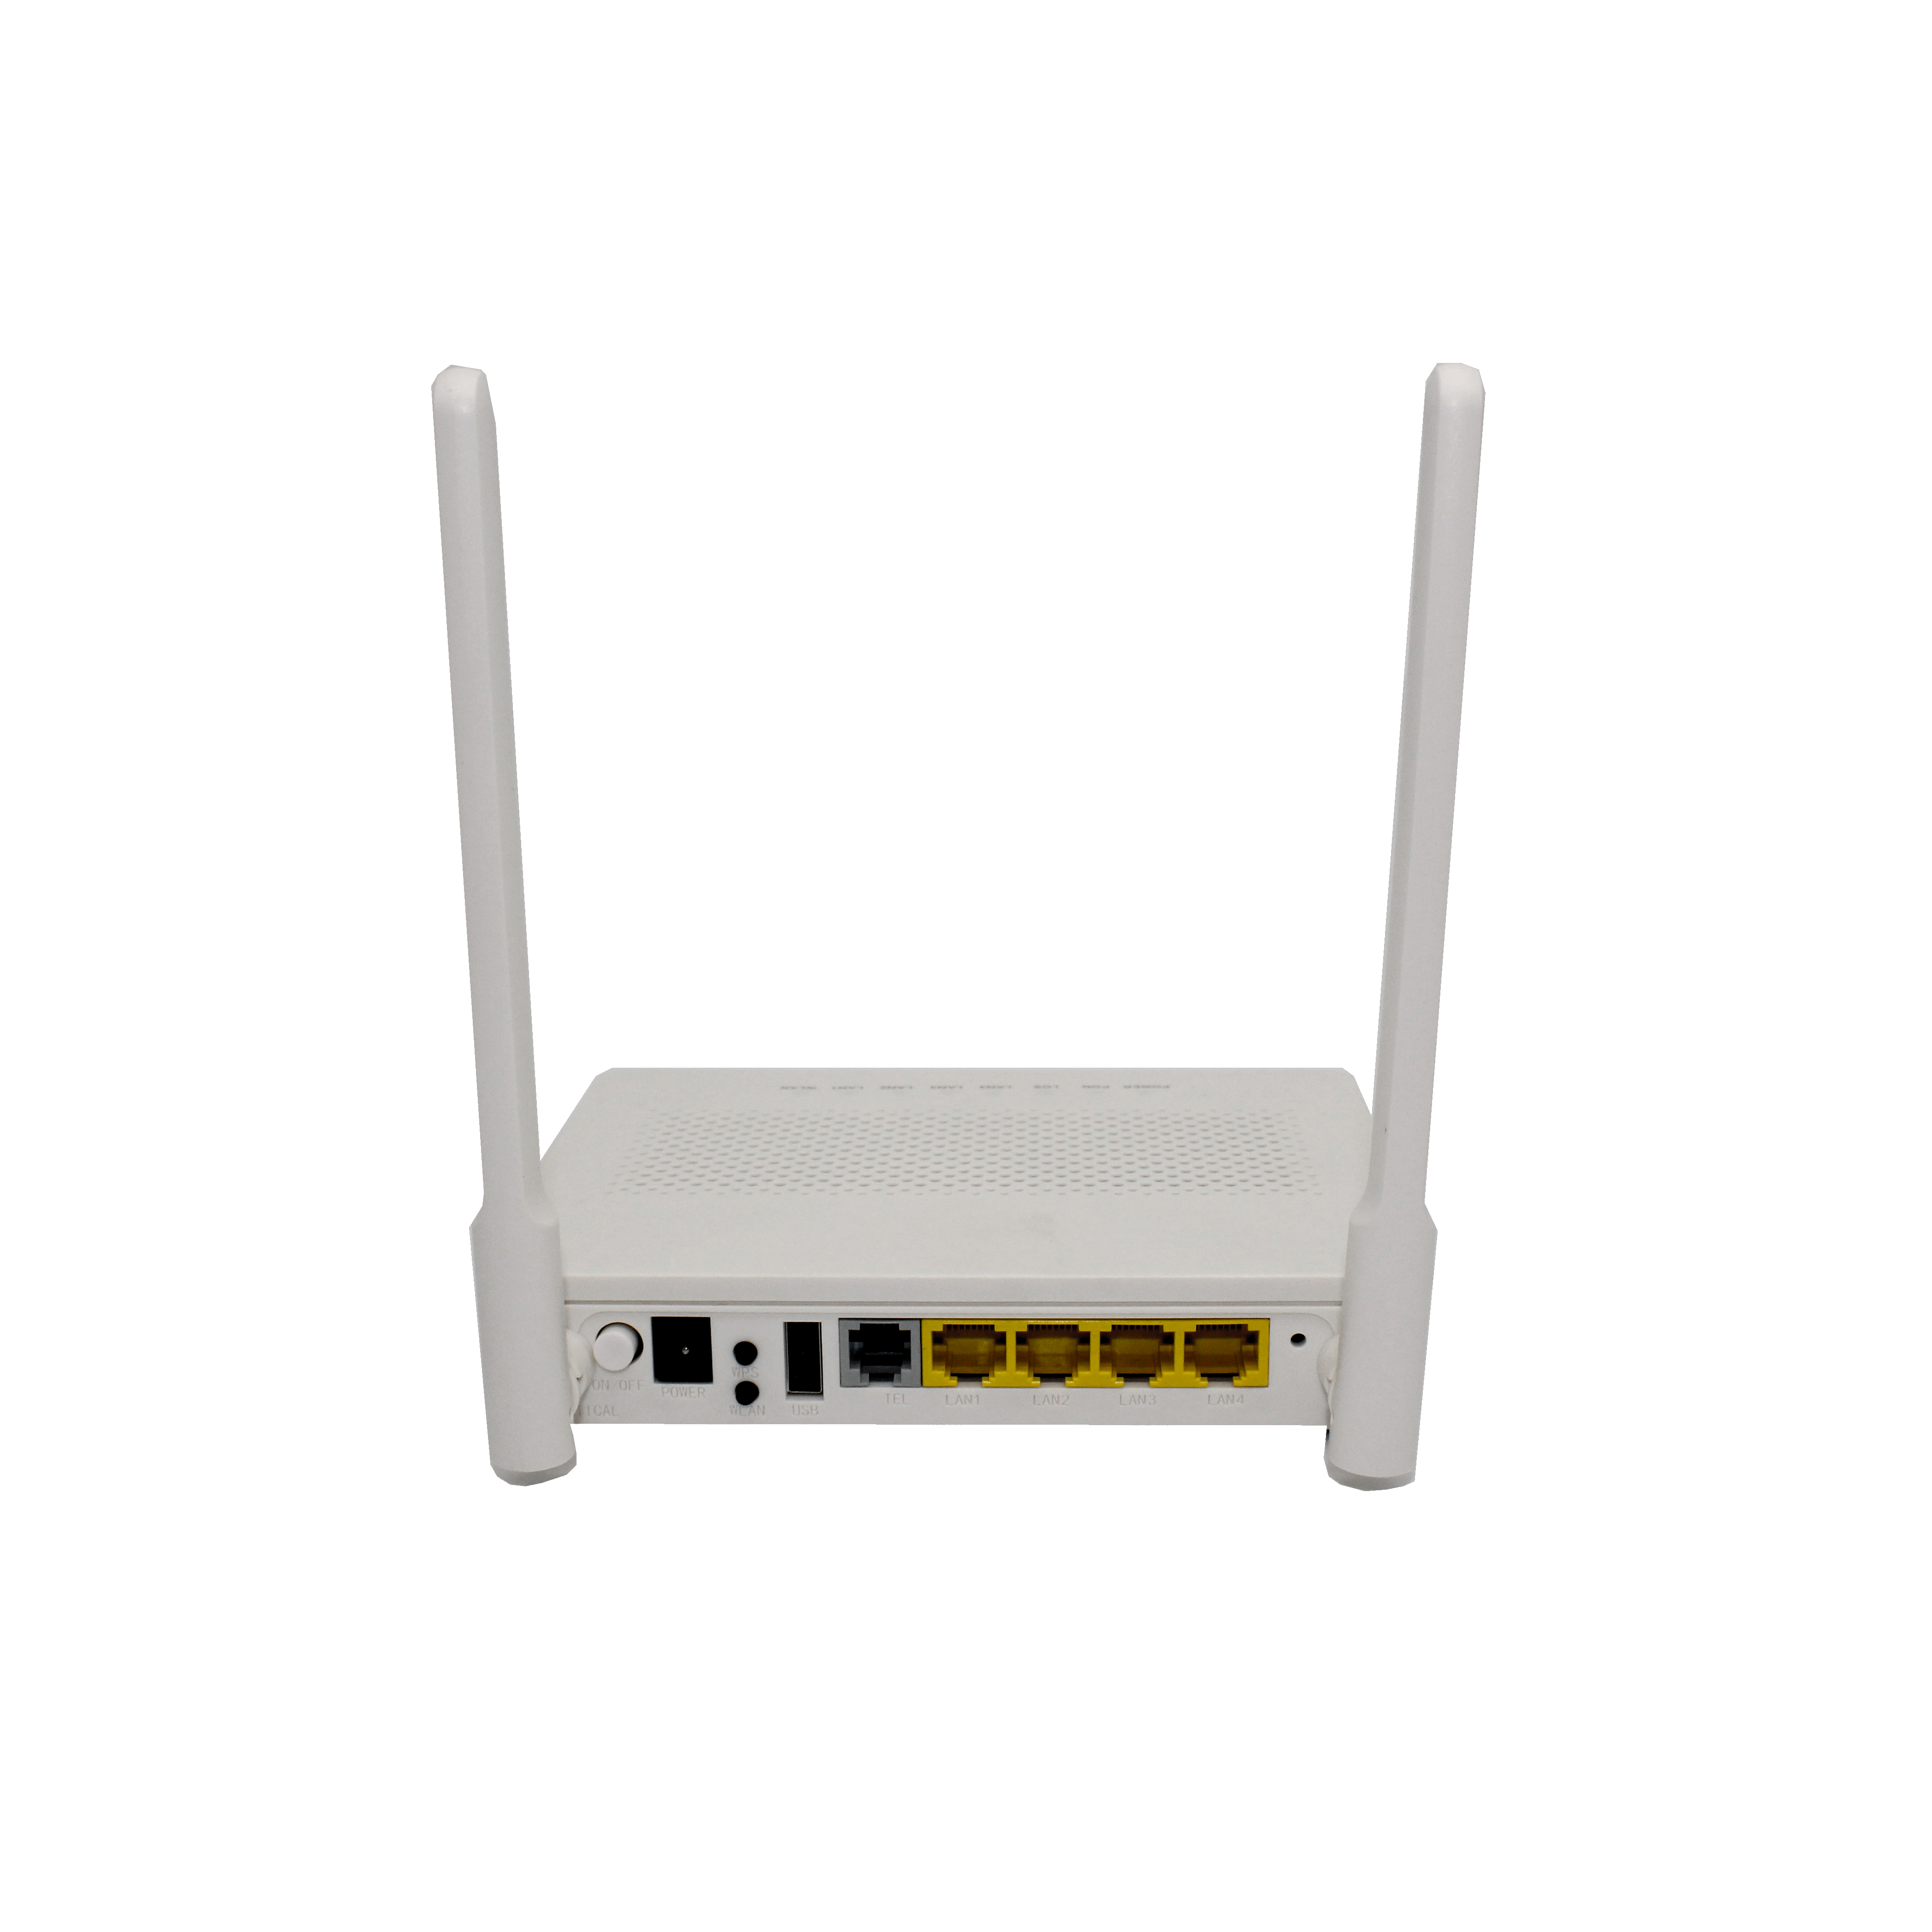 XPON ONU with WIFI function